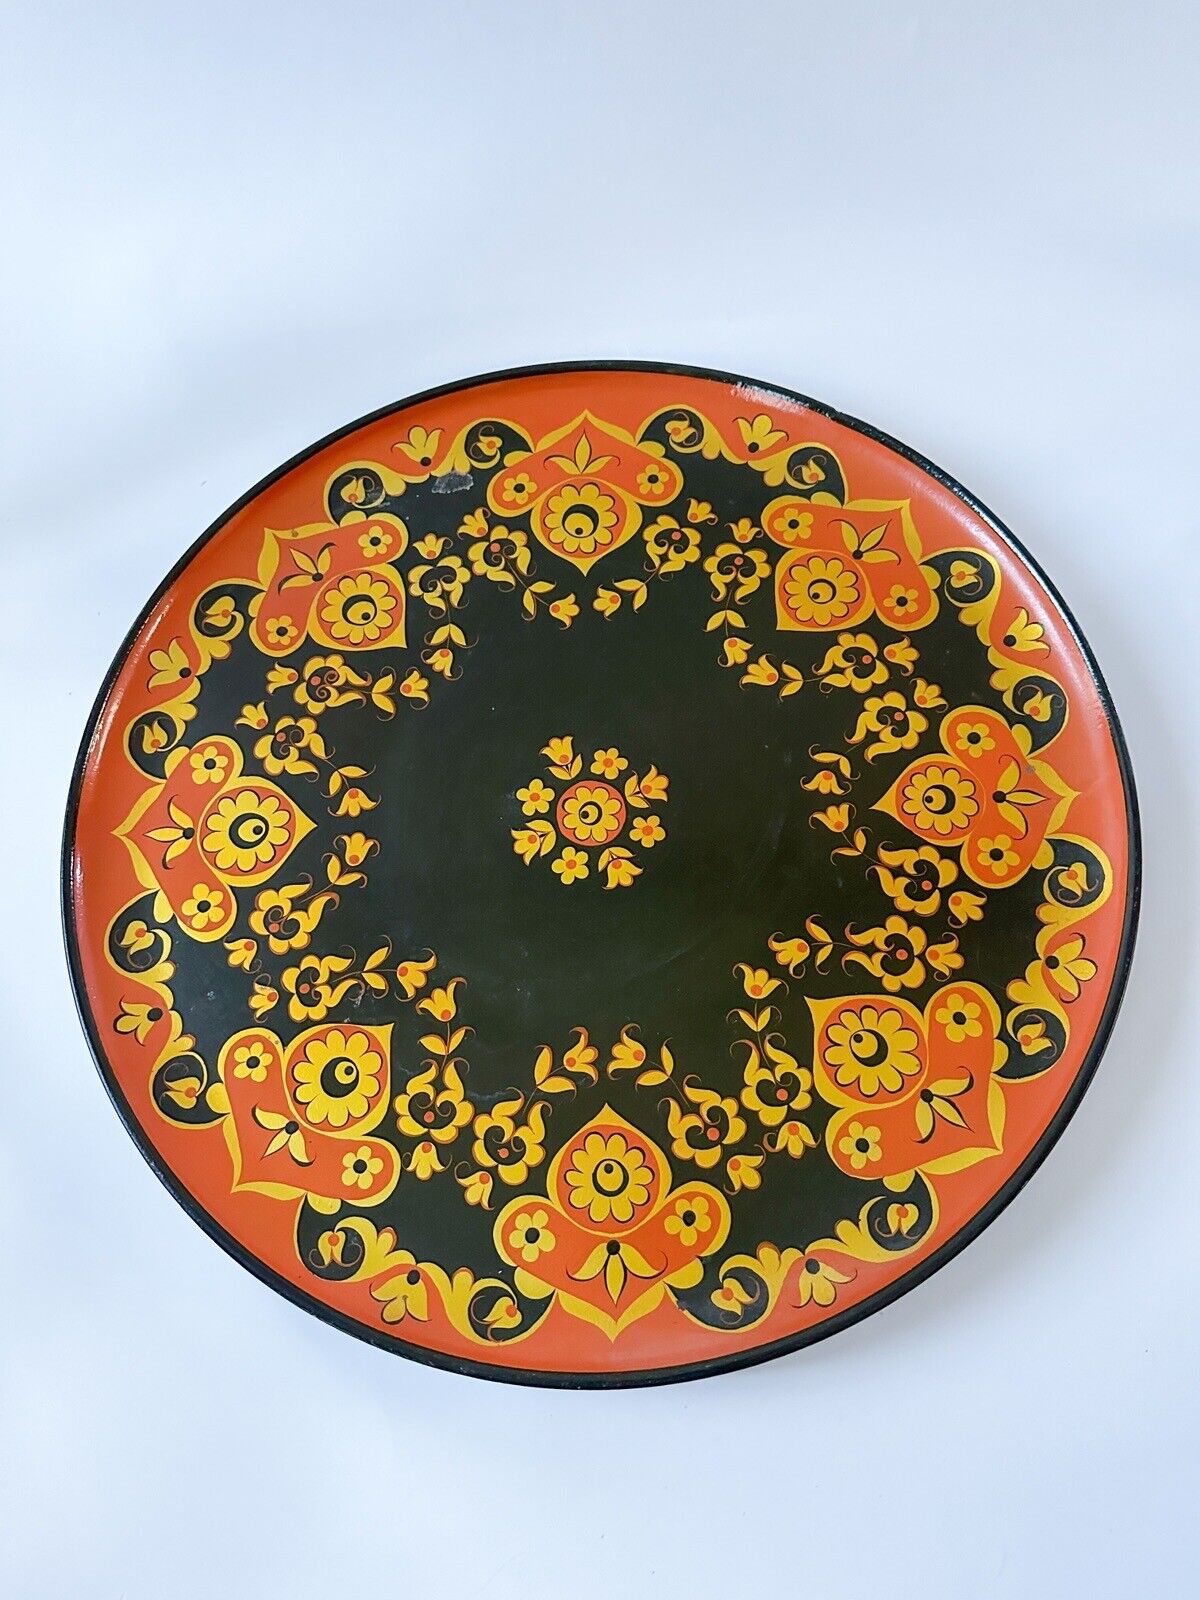 VTG Russian Folk Art Black Lacquer Hand Painted Flowers Wood, Plate USSR 16.5”